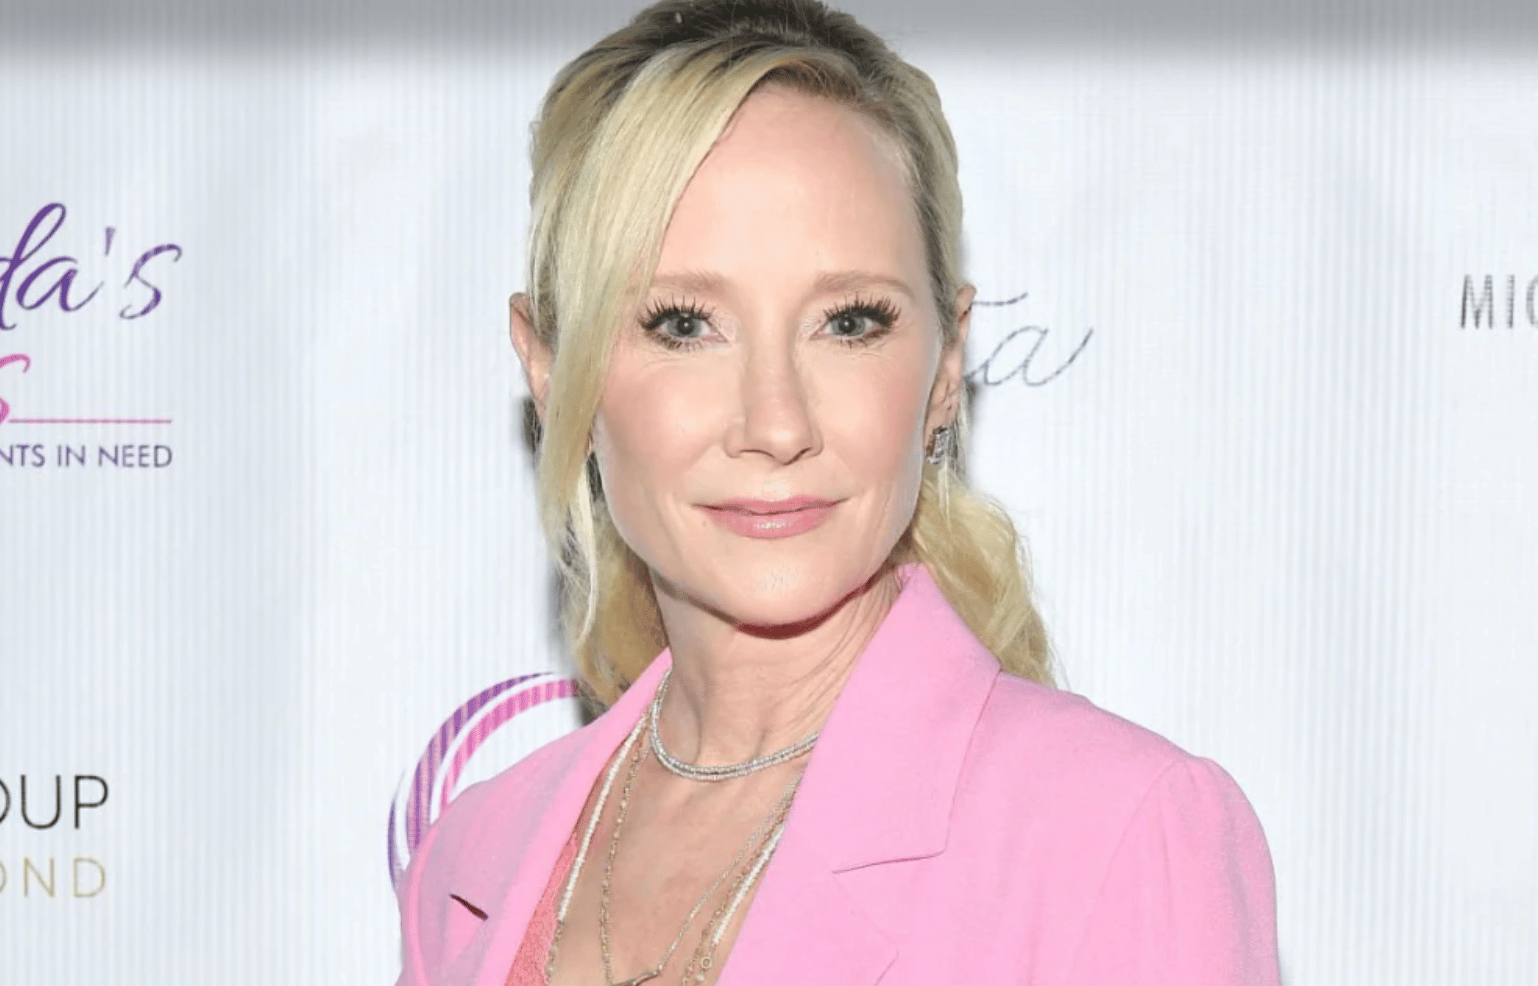 Anne Heche Had Narcotics But Not Alcohol in System During Crash, Police Say